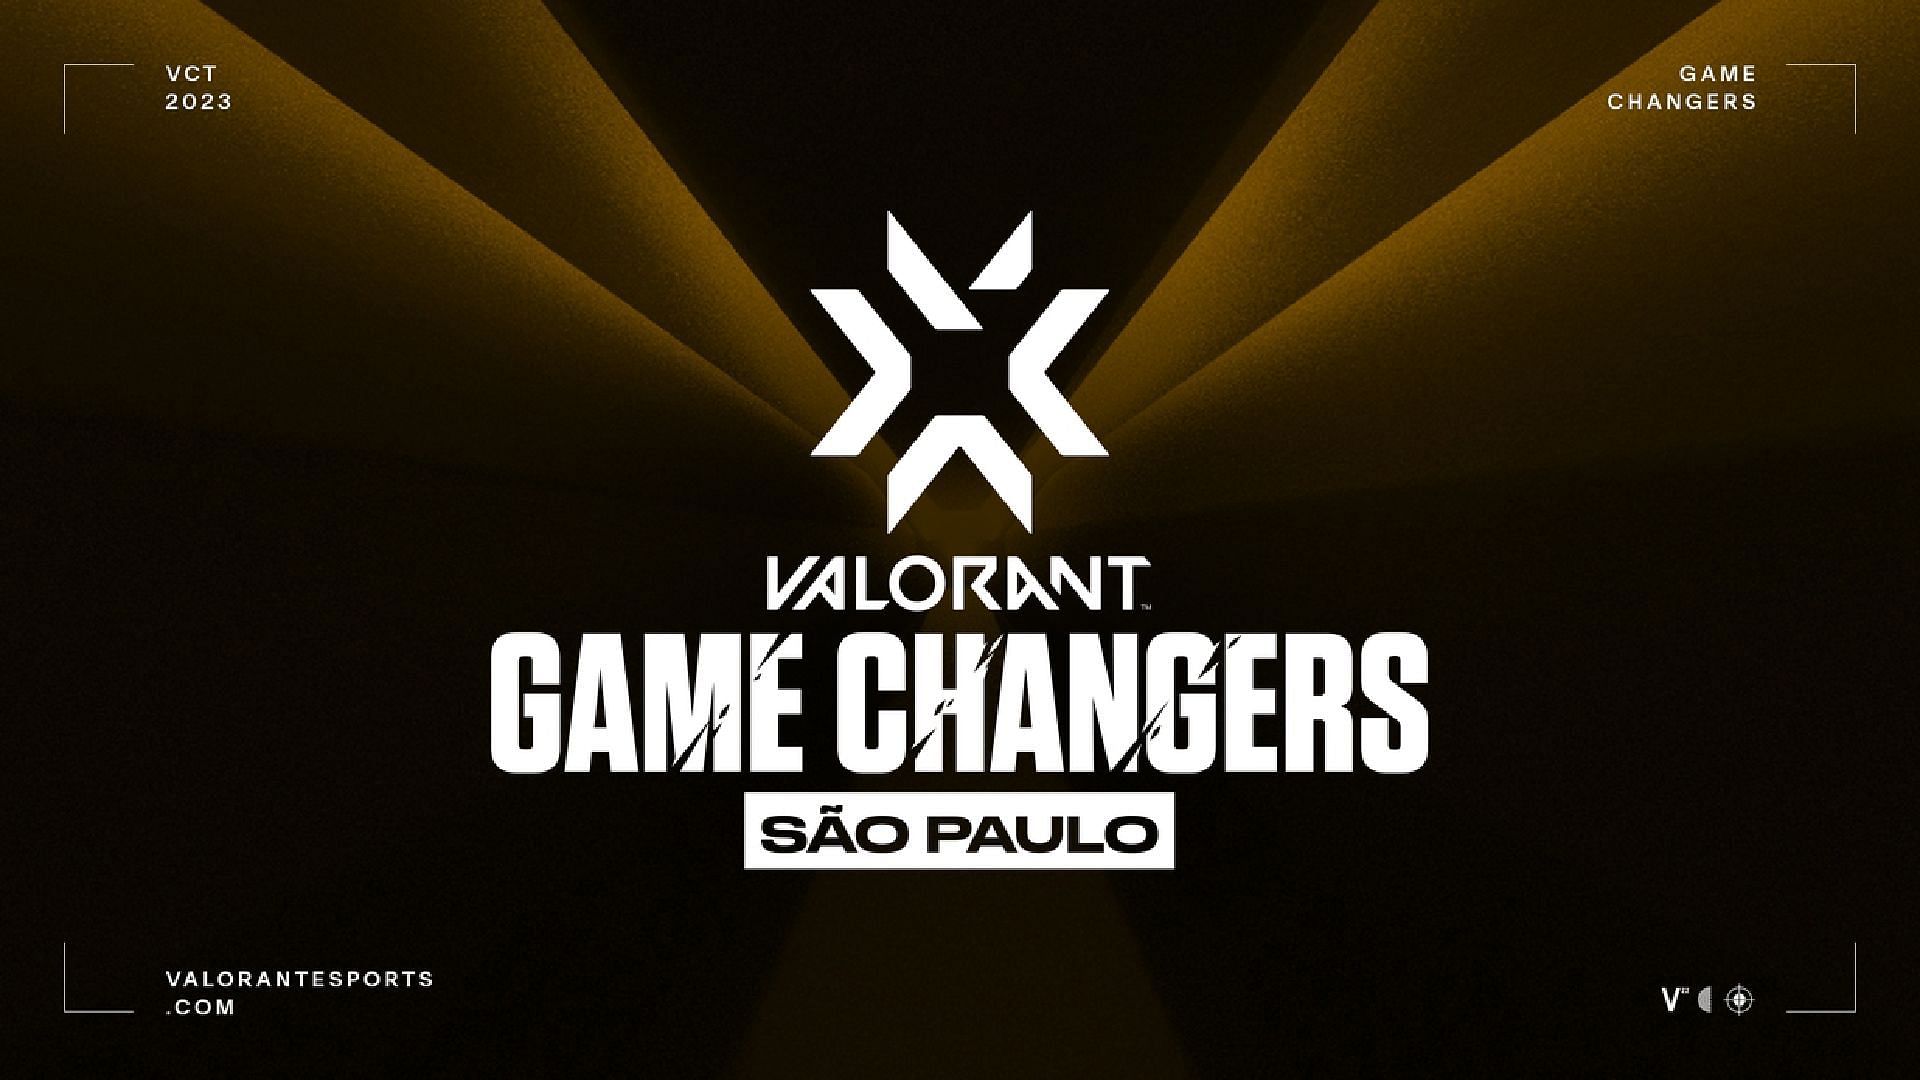 The Road to Game Changers Championship 2023